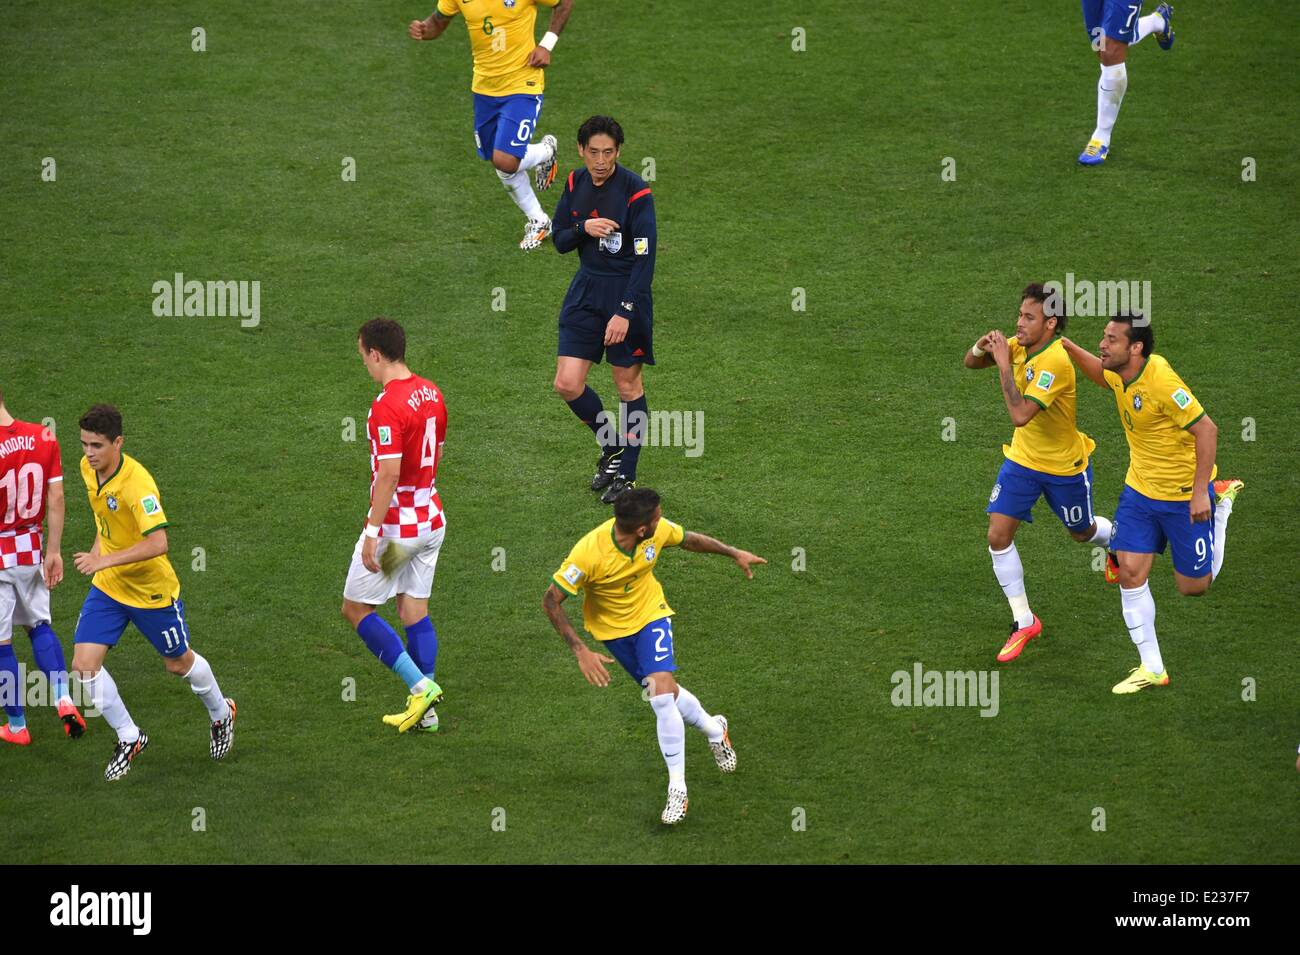 Sao Paulo, Brazil. 12th June, 2014. (R-L) Fred, Neymar (BRA), Yuichi Nishimura (Referee) Football/Soccer : Neymar of Brazil celebrates with his teammate Fred after scoring their first goal during the FIFA World Cup Brazil 2014 Group A match between Brazil 3-1 Croatia at Arena de Sao Paulo in Sao Paulo, Brazil . © FAR EAST PRESS/AFLO/Alamy Live News Stock Photo